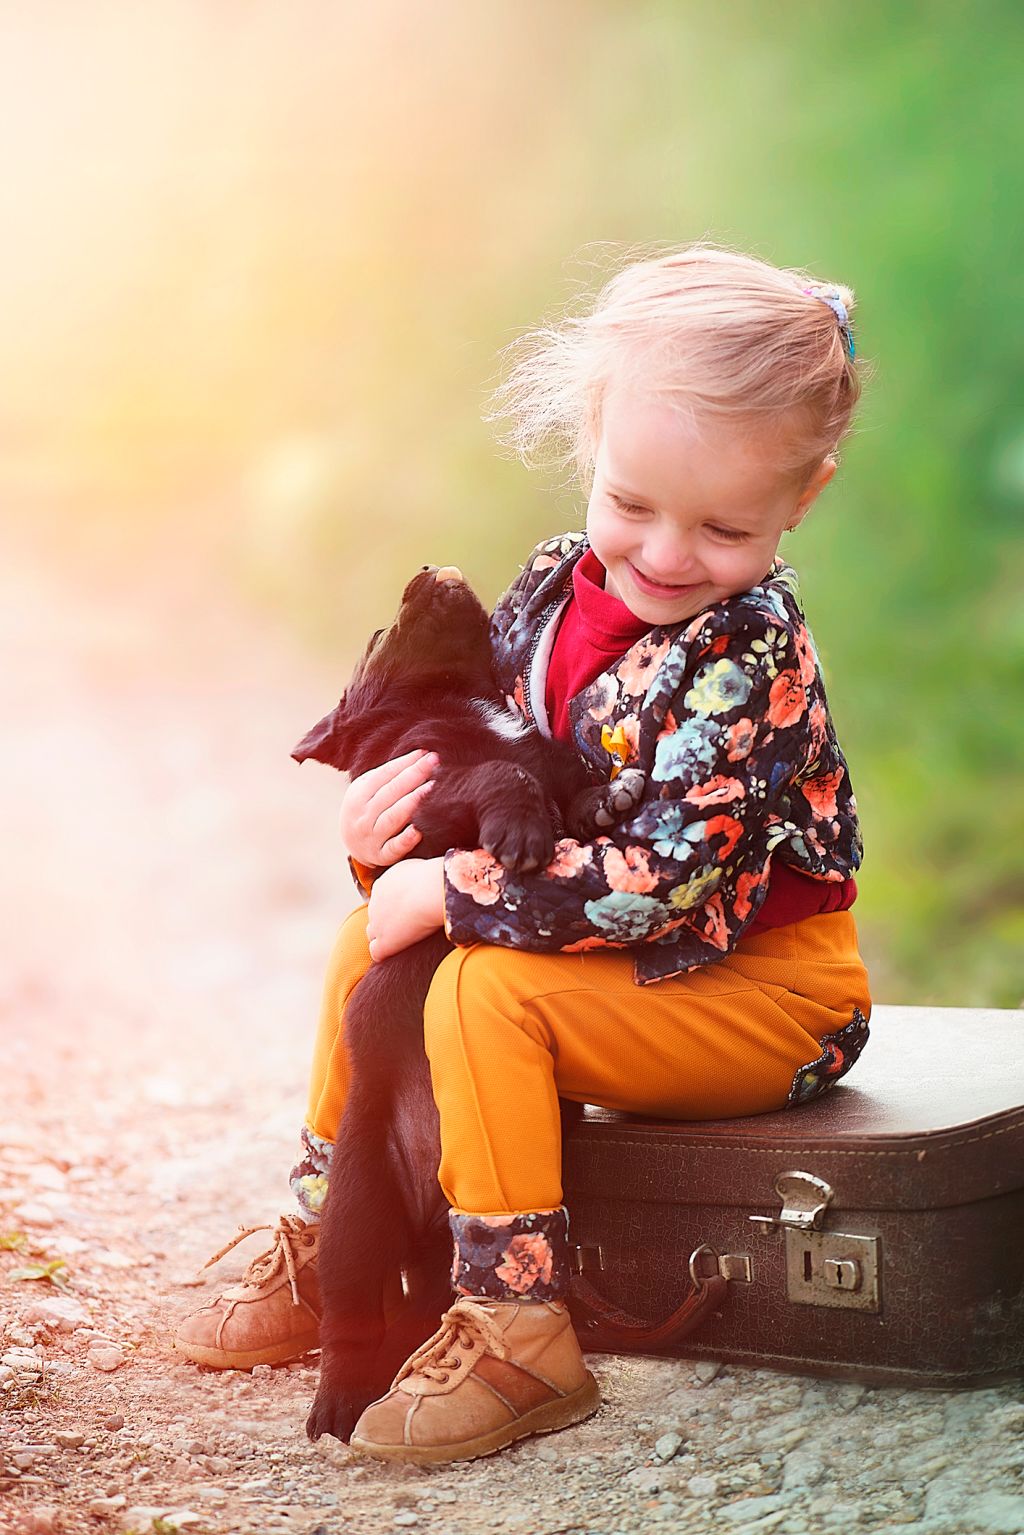 Girl Playing with Puppy